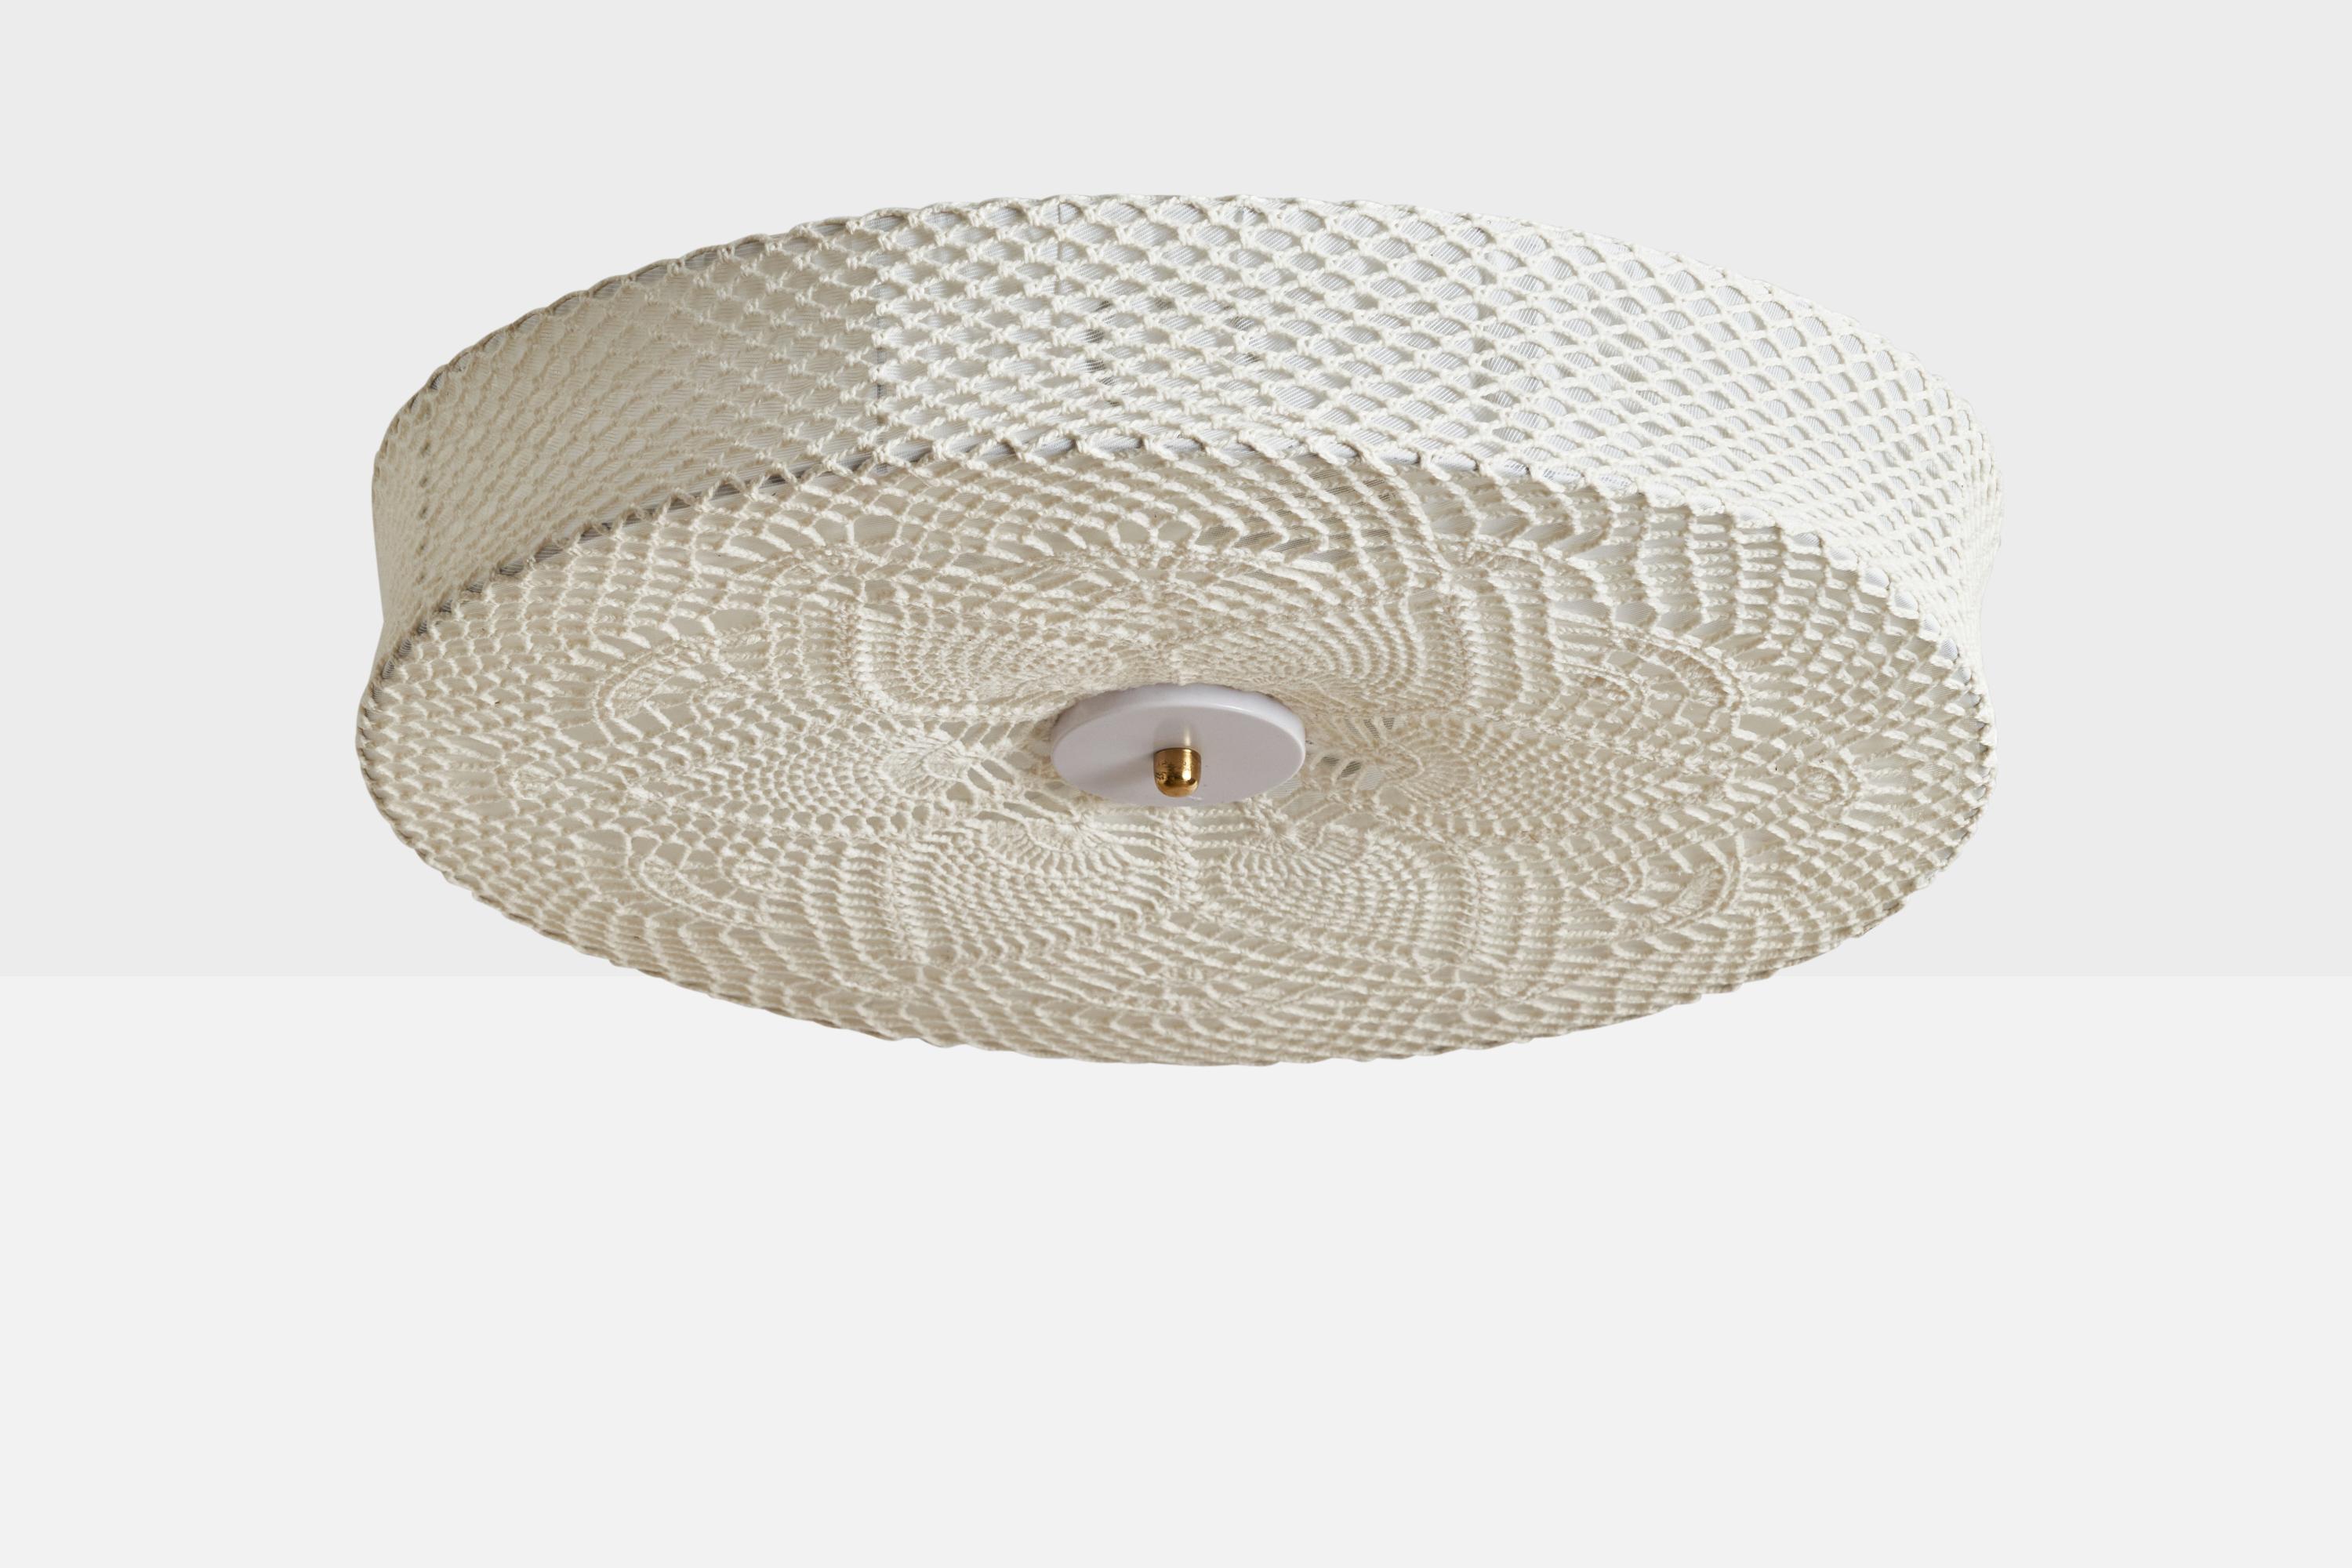 An embroidery fabric, metal and brass wall light designed and produced in Sweden, 1960s.

Dimensions of canopy (inches): 4.5” H x 4” Diameter
Socket takes standard E-26 bulbs. 3 sockets.There is no maximum wattage stated on the fixture. All lighting